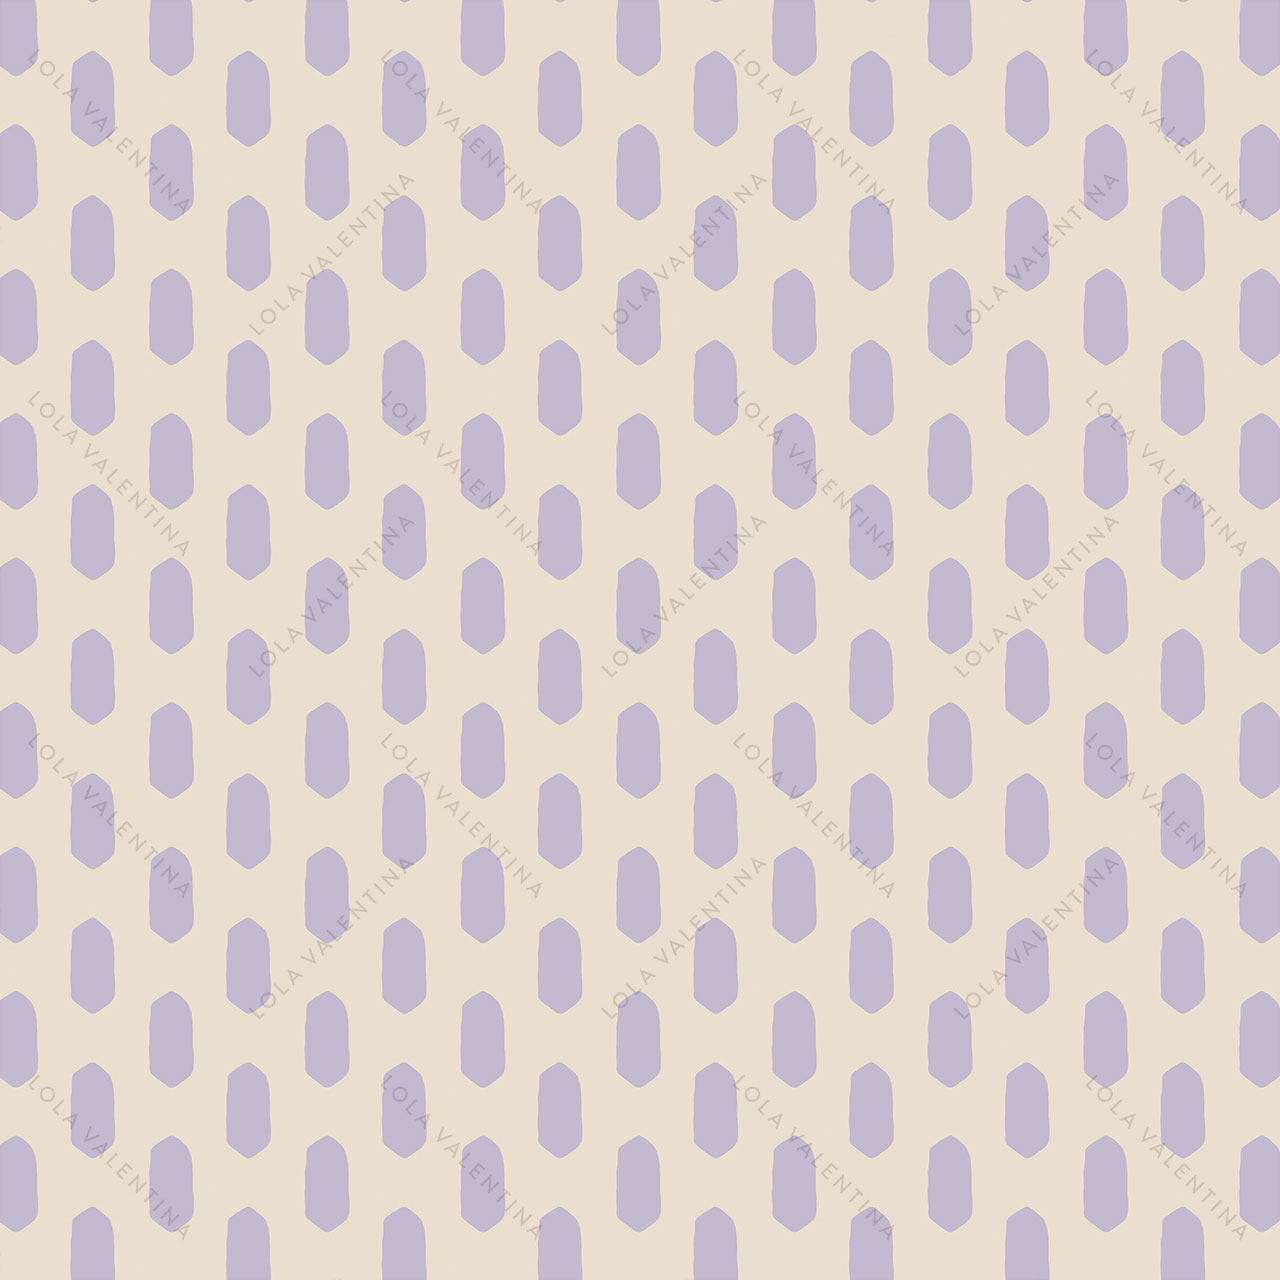 Orchid-Bloom-Violet-Purple-Ivory-Abstract-Oval-Shapes-Pattern